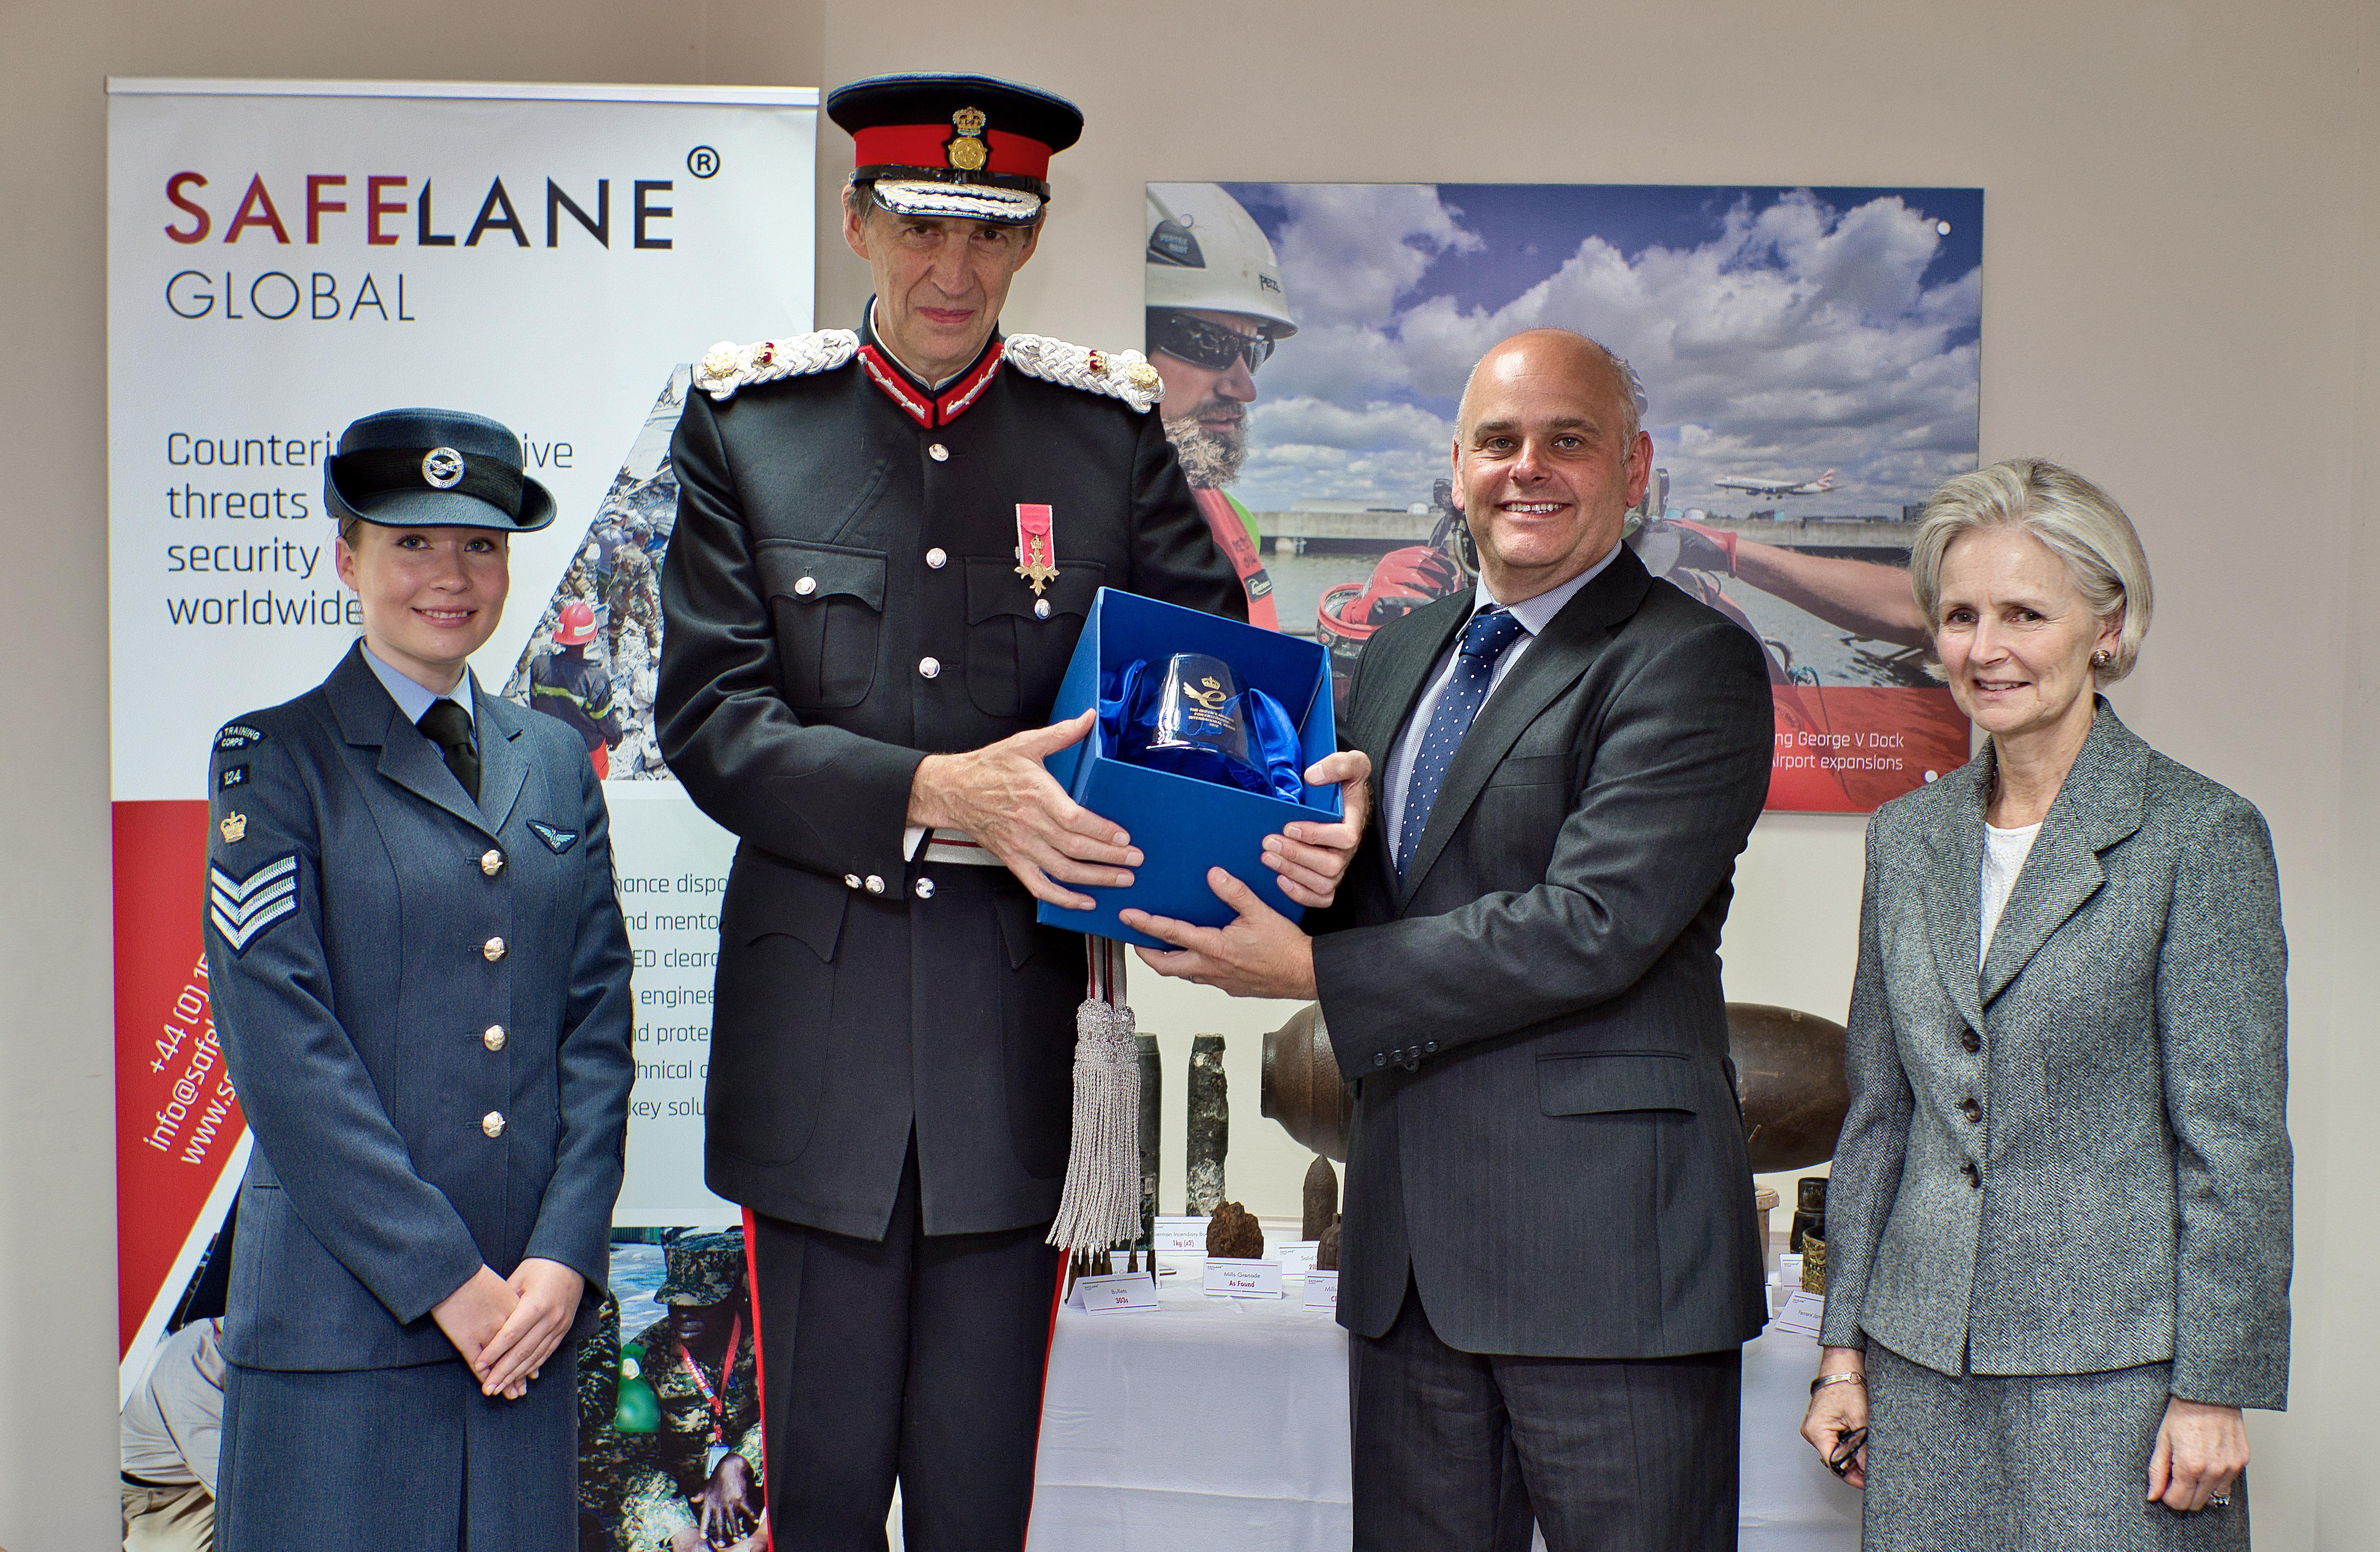 The Lord-Lieutenant of Herefordshire Presents the QAE 2021 crystal to Saflane Globel 